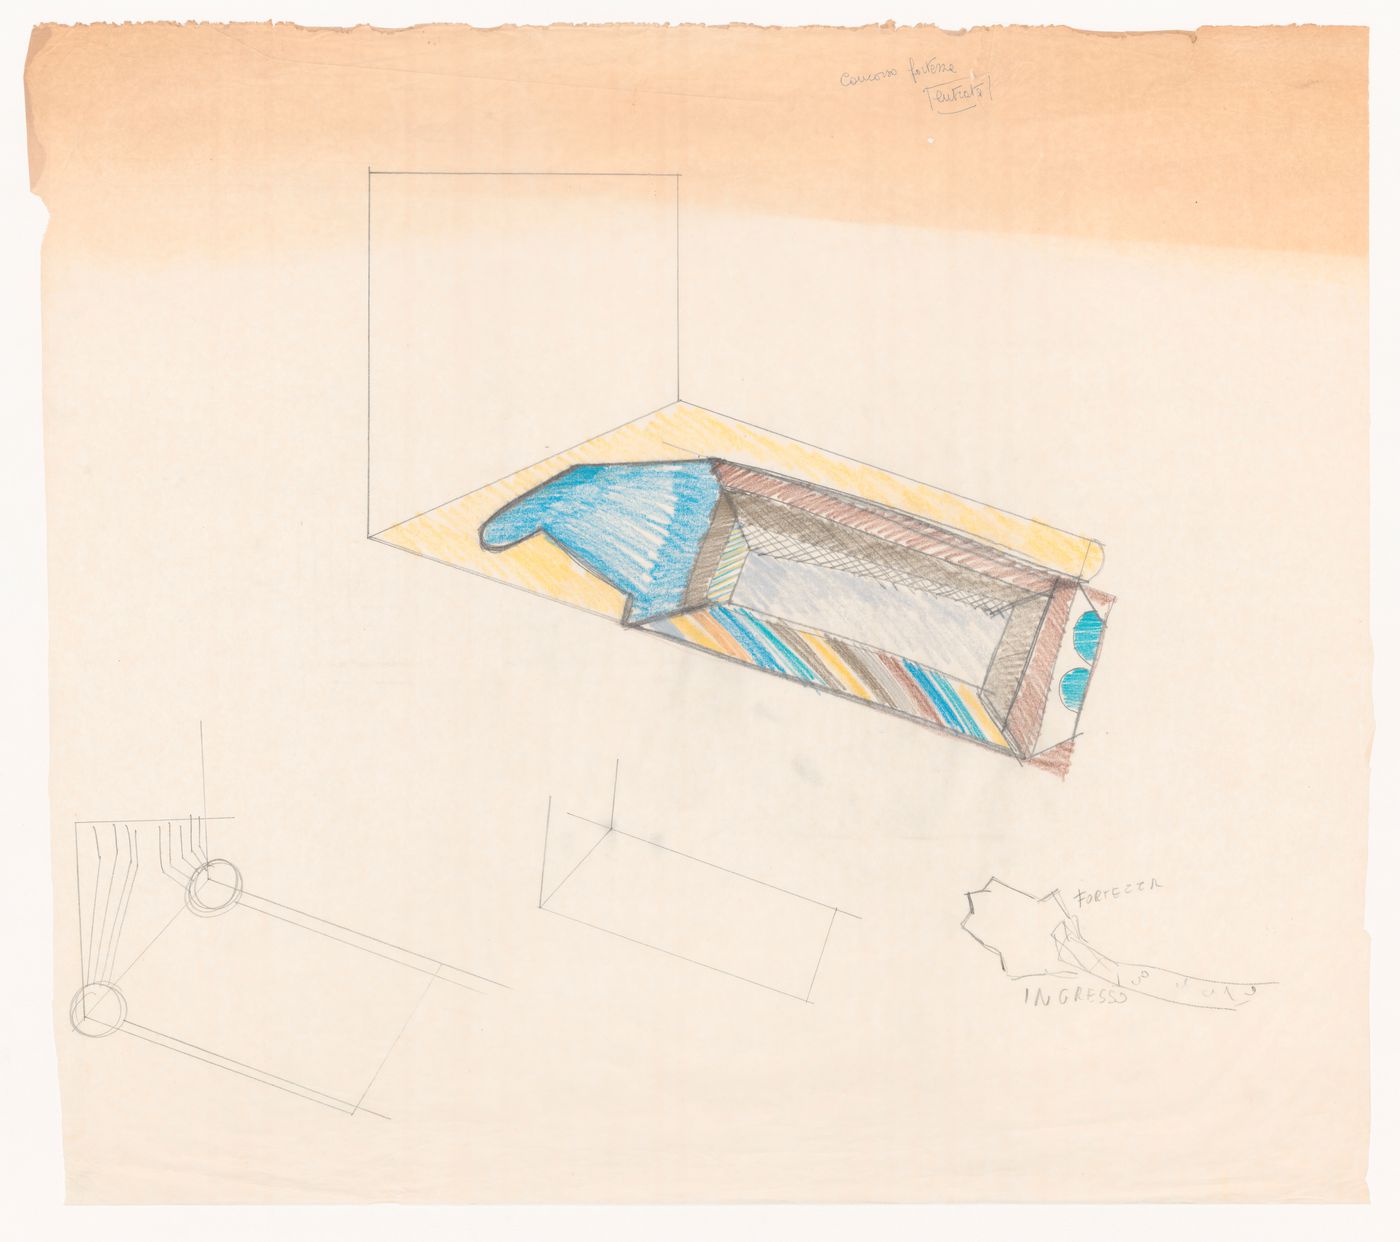 Sketch for Fortezza da Basso, National Centre for Arts and Crafts, Florence, Italy